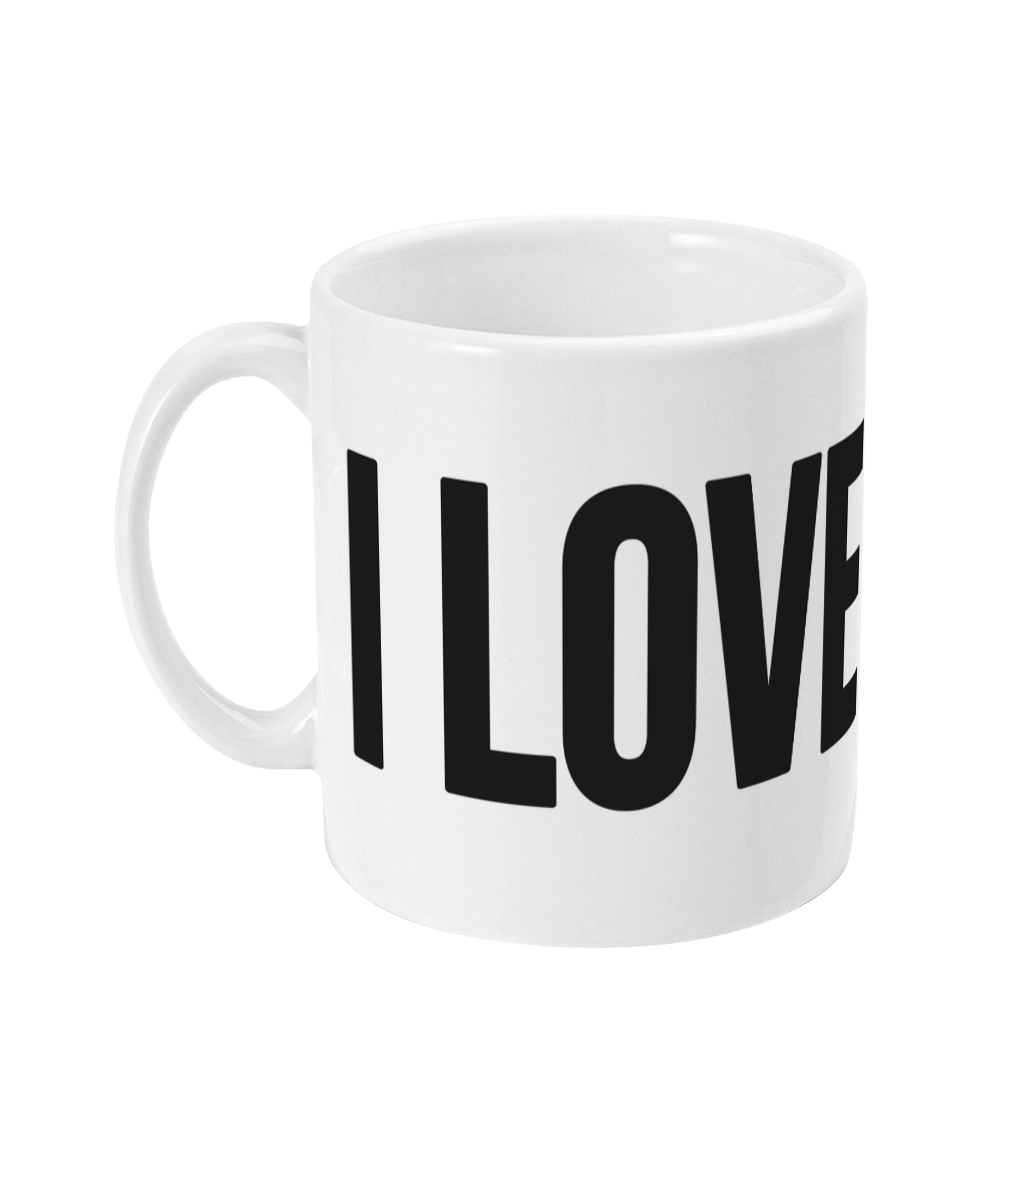 A unique mug featuring bold statement. Brighten up your desk with this bold but cute typography design. It will make the perfect gift for that special person in your life whether it's for a birthday, Valentine's, Christmas or any other special occasion.    Mug reads: I LOVE YOU.